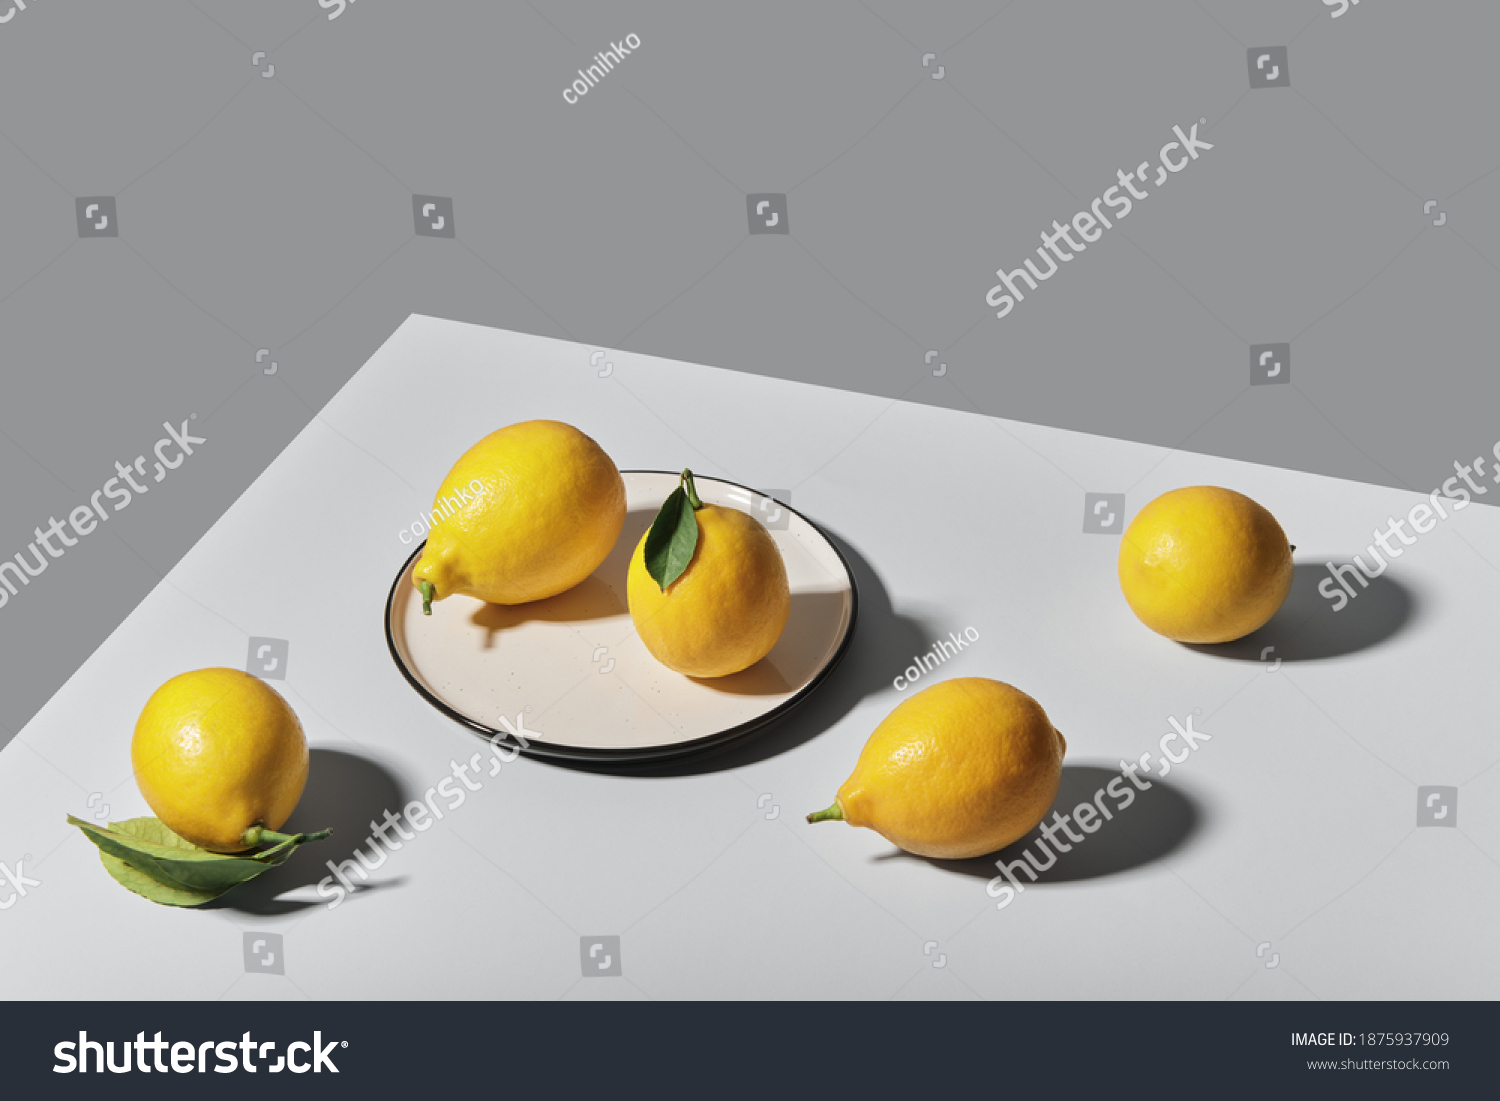 Trending colors of 2021. Yellow illuminating lemons on Ultimate gray tablecloth. Isometric view minimal still life. #1875937909